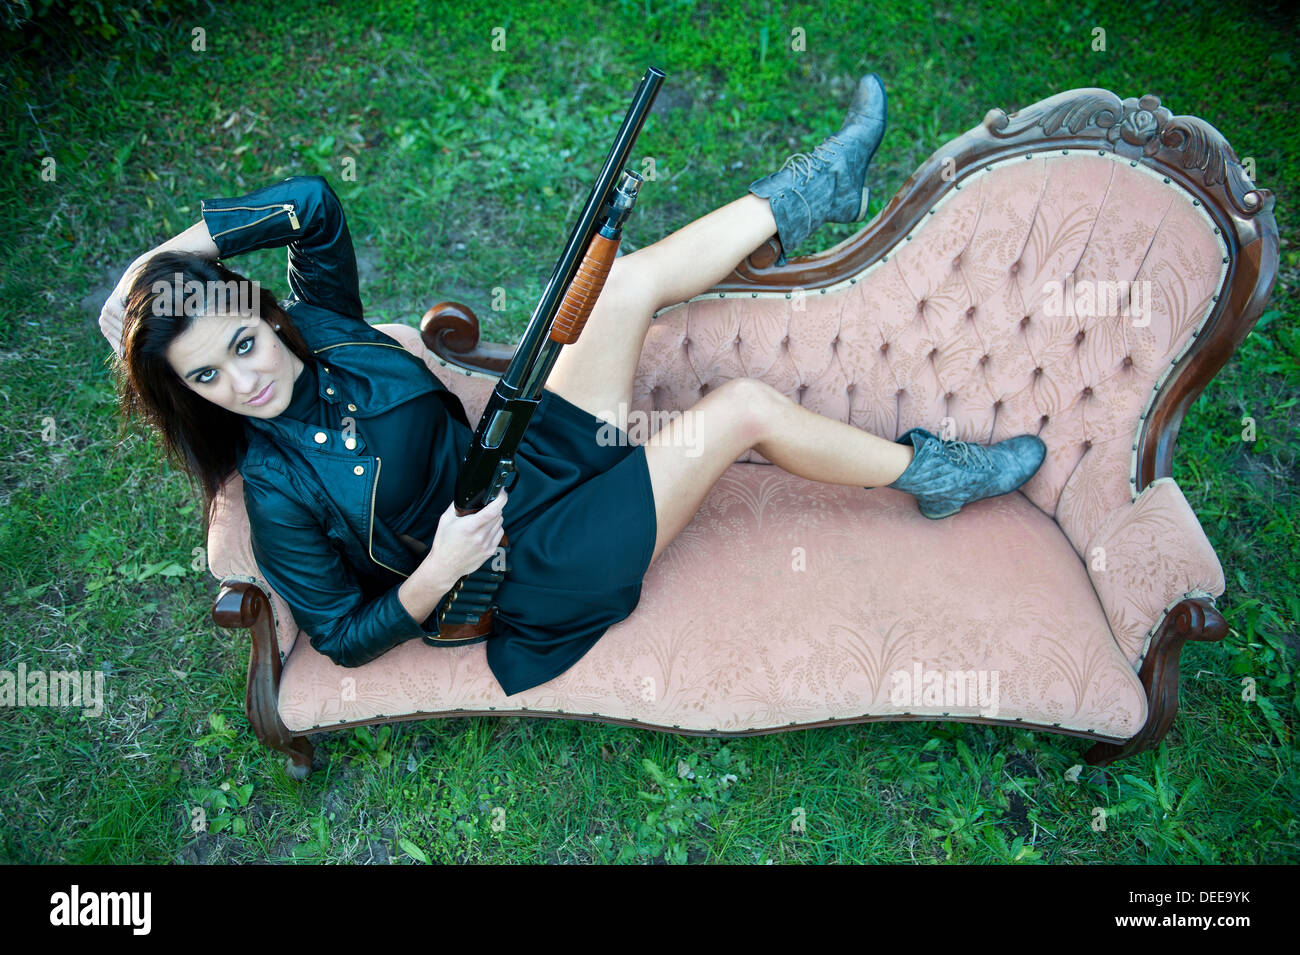 Sexy Caucasian female model posing in a seductive, yet flattering manner on a vintage couch with a shotgun, boots & jacket. Stock Photo